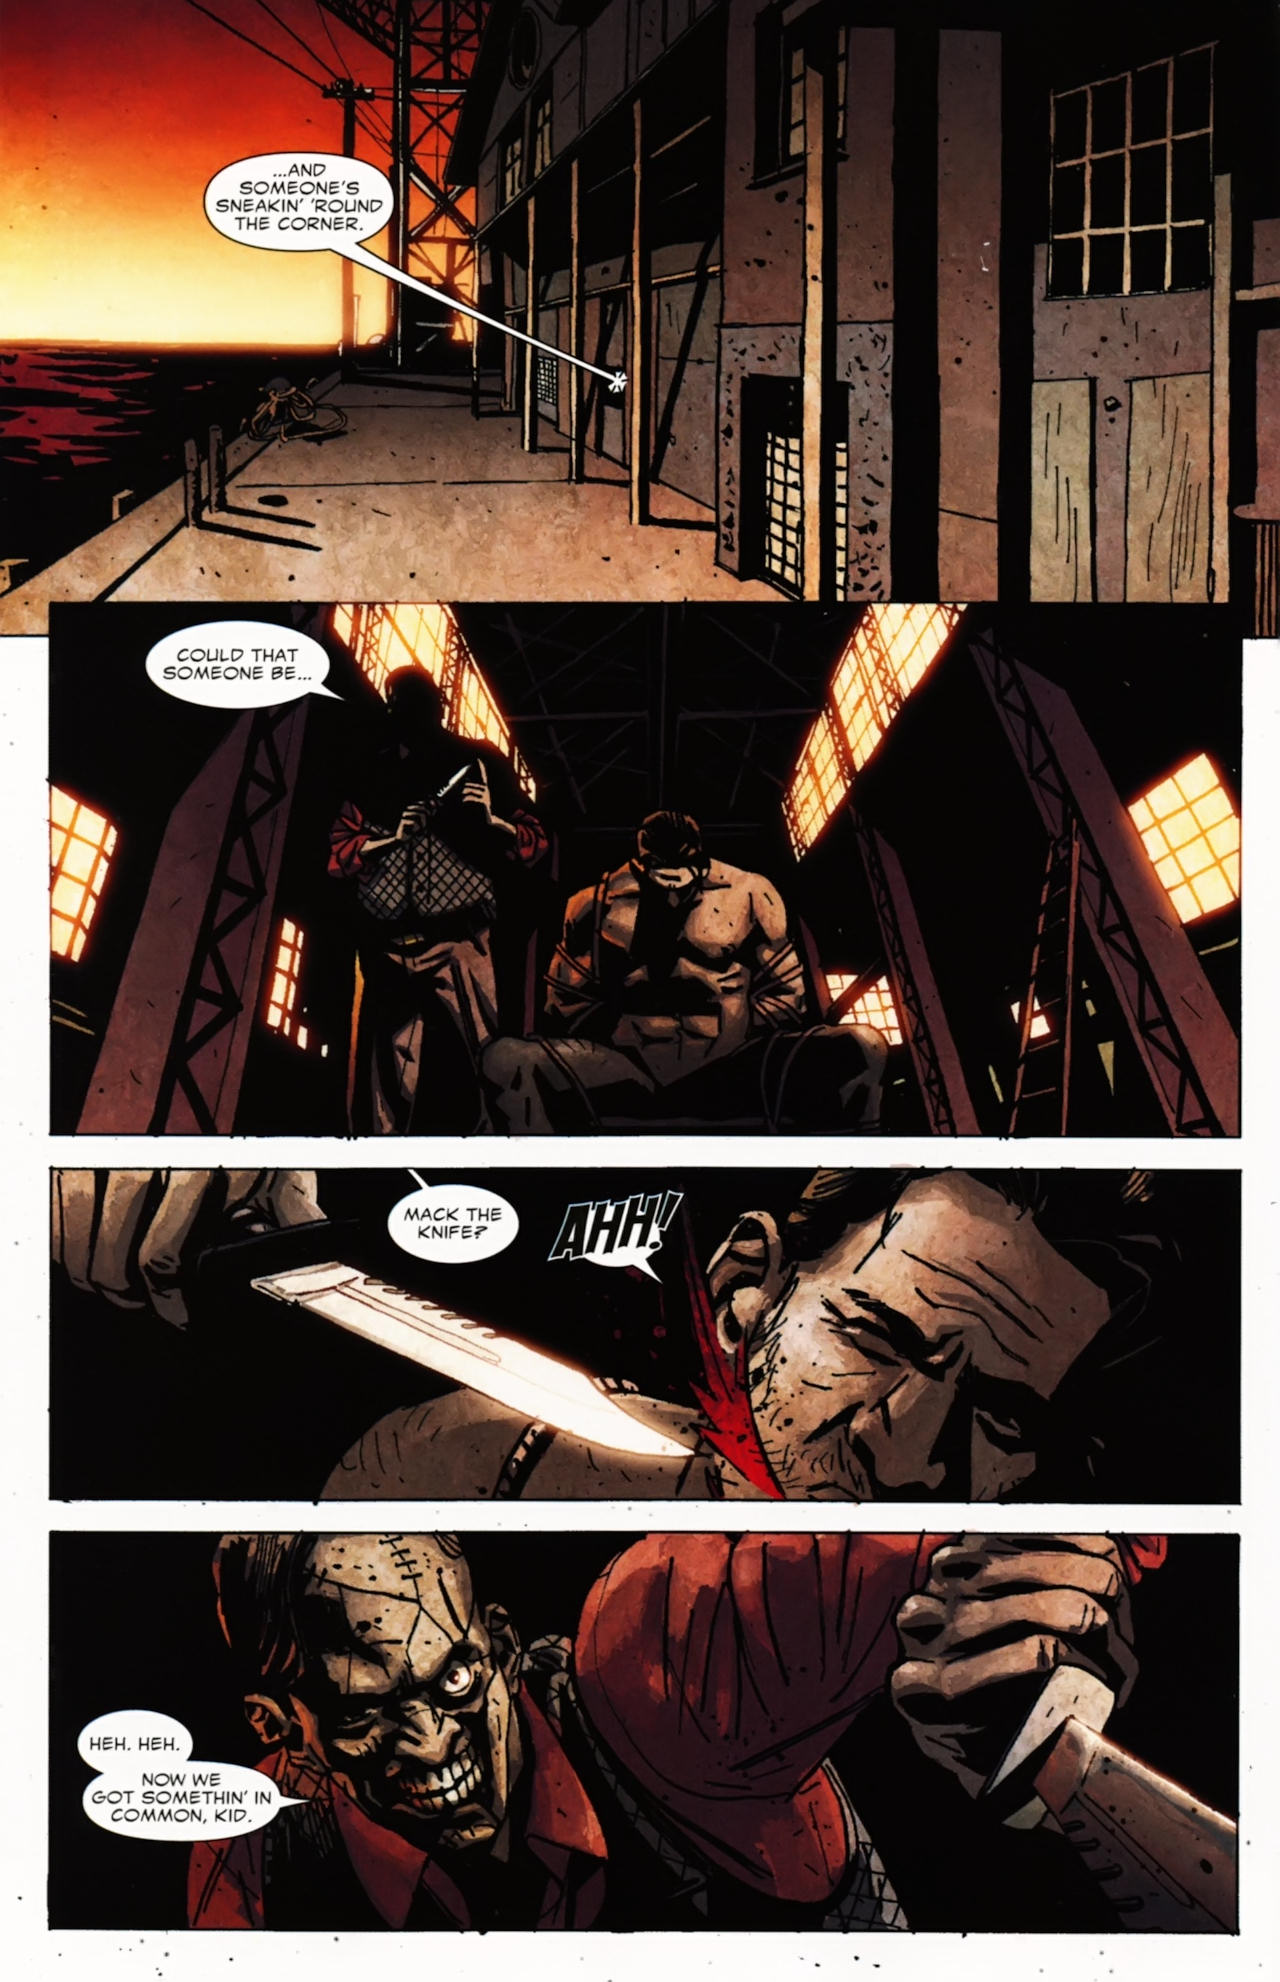 Punisher Noir #3 (of 4) - Two Down...